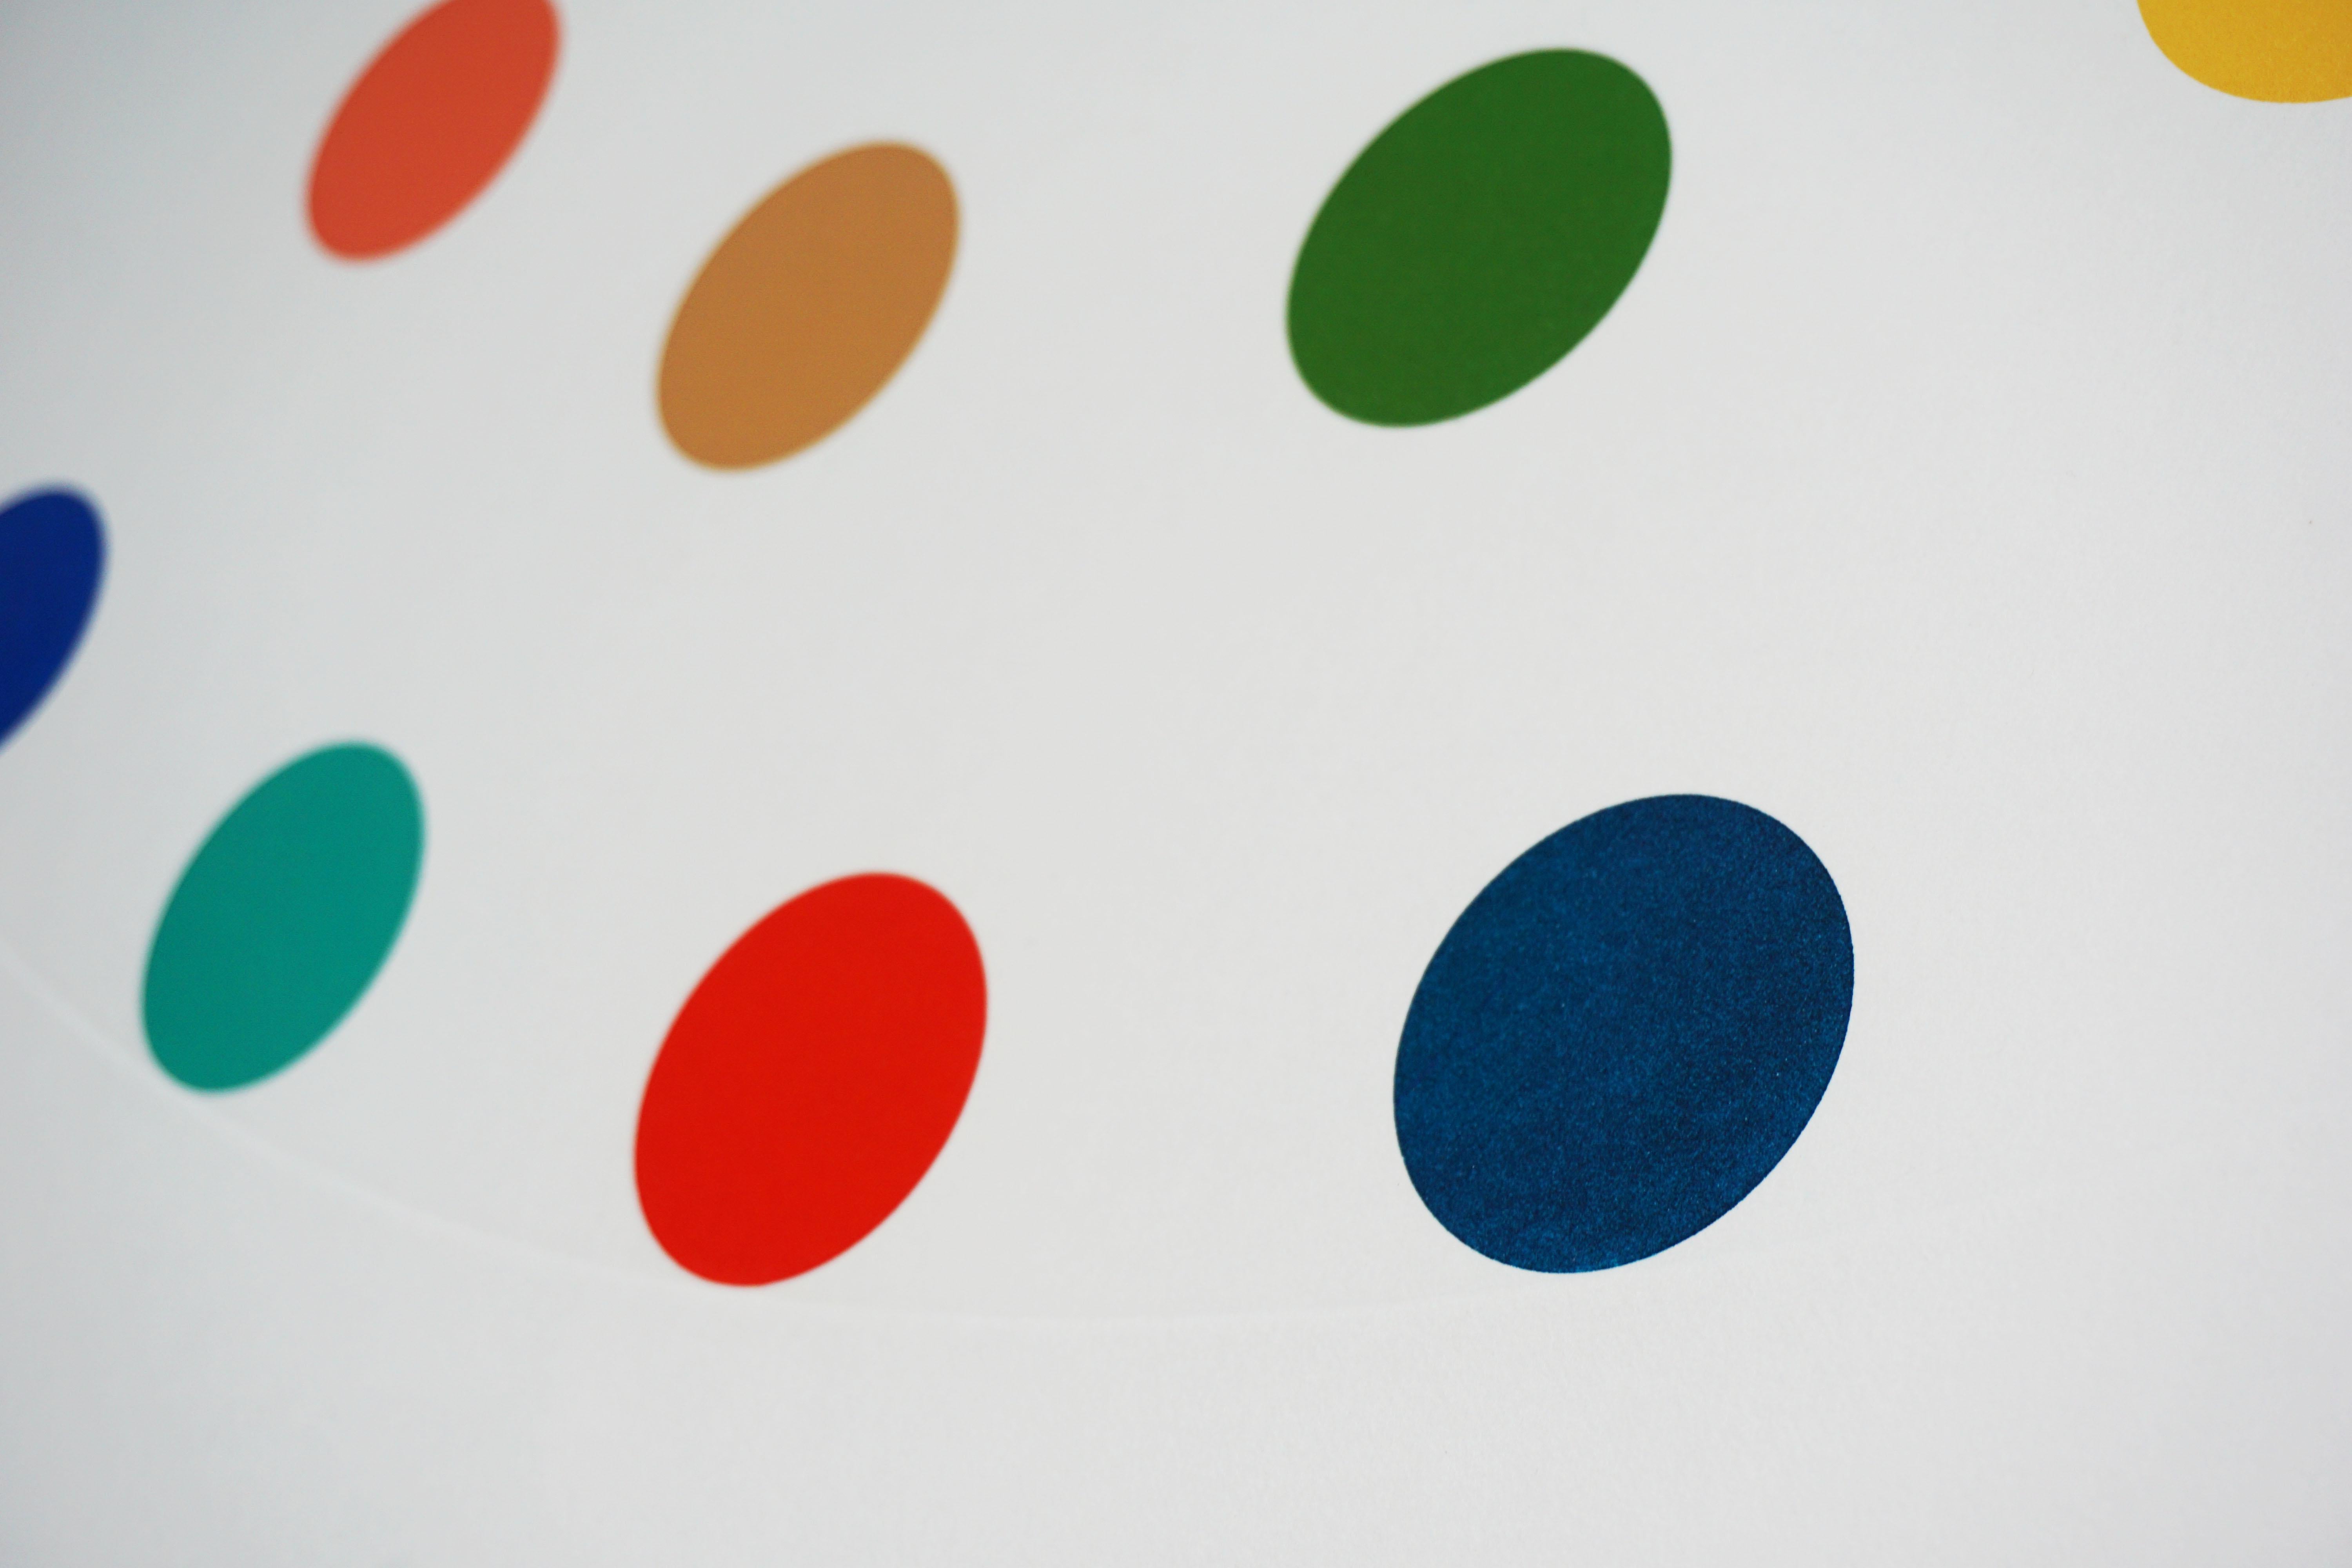 The Multi-color Spots by Damien Hirst is hand etched with aquatint in his signature, never repeated, palette of bright colors. Signed by the artist in pencil on the lower center and numbered on verso. This artwork comes in a custom made museum